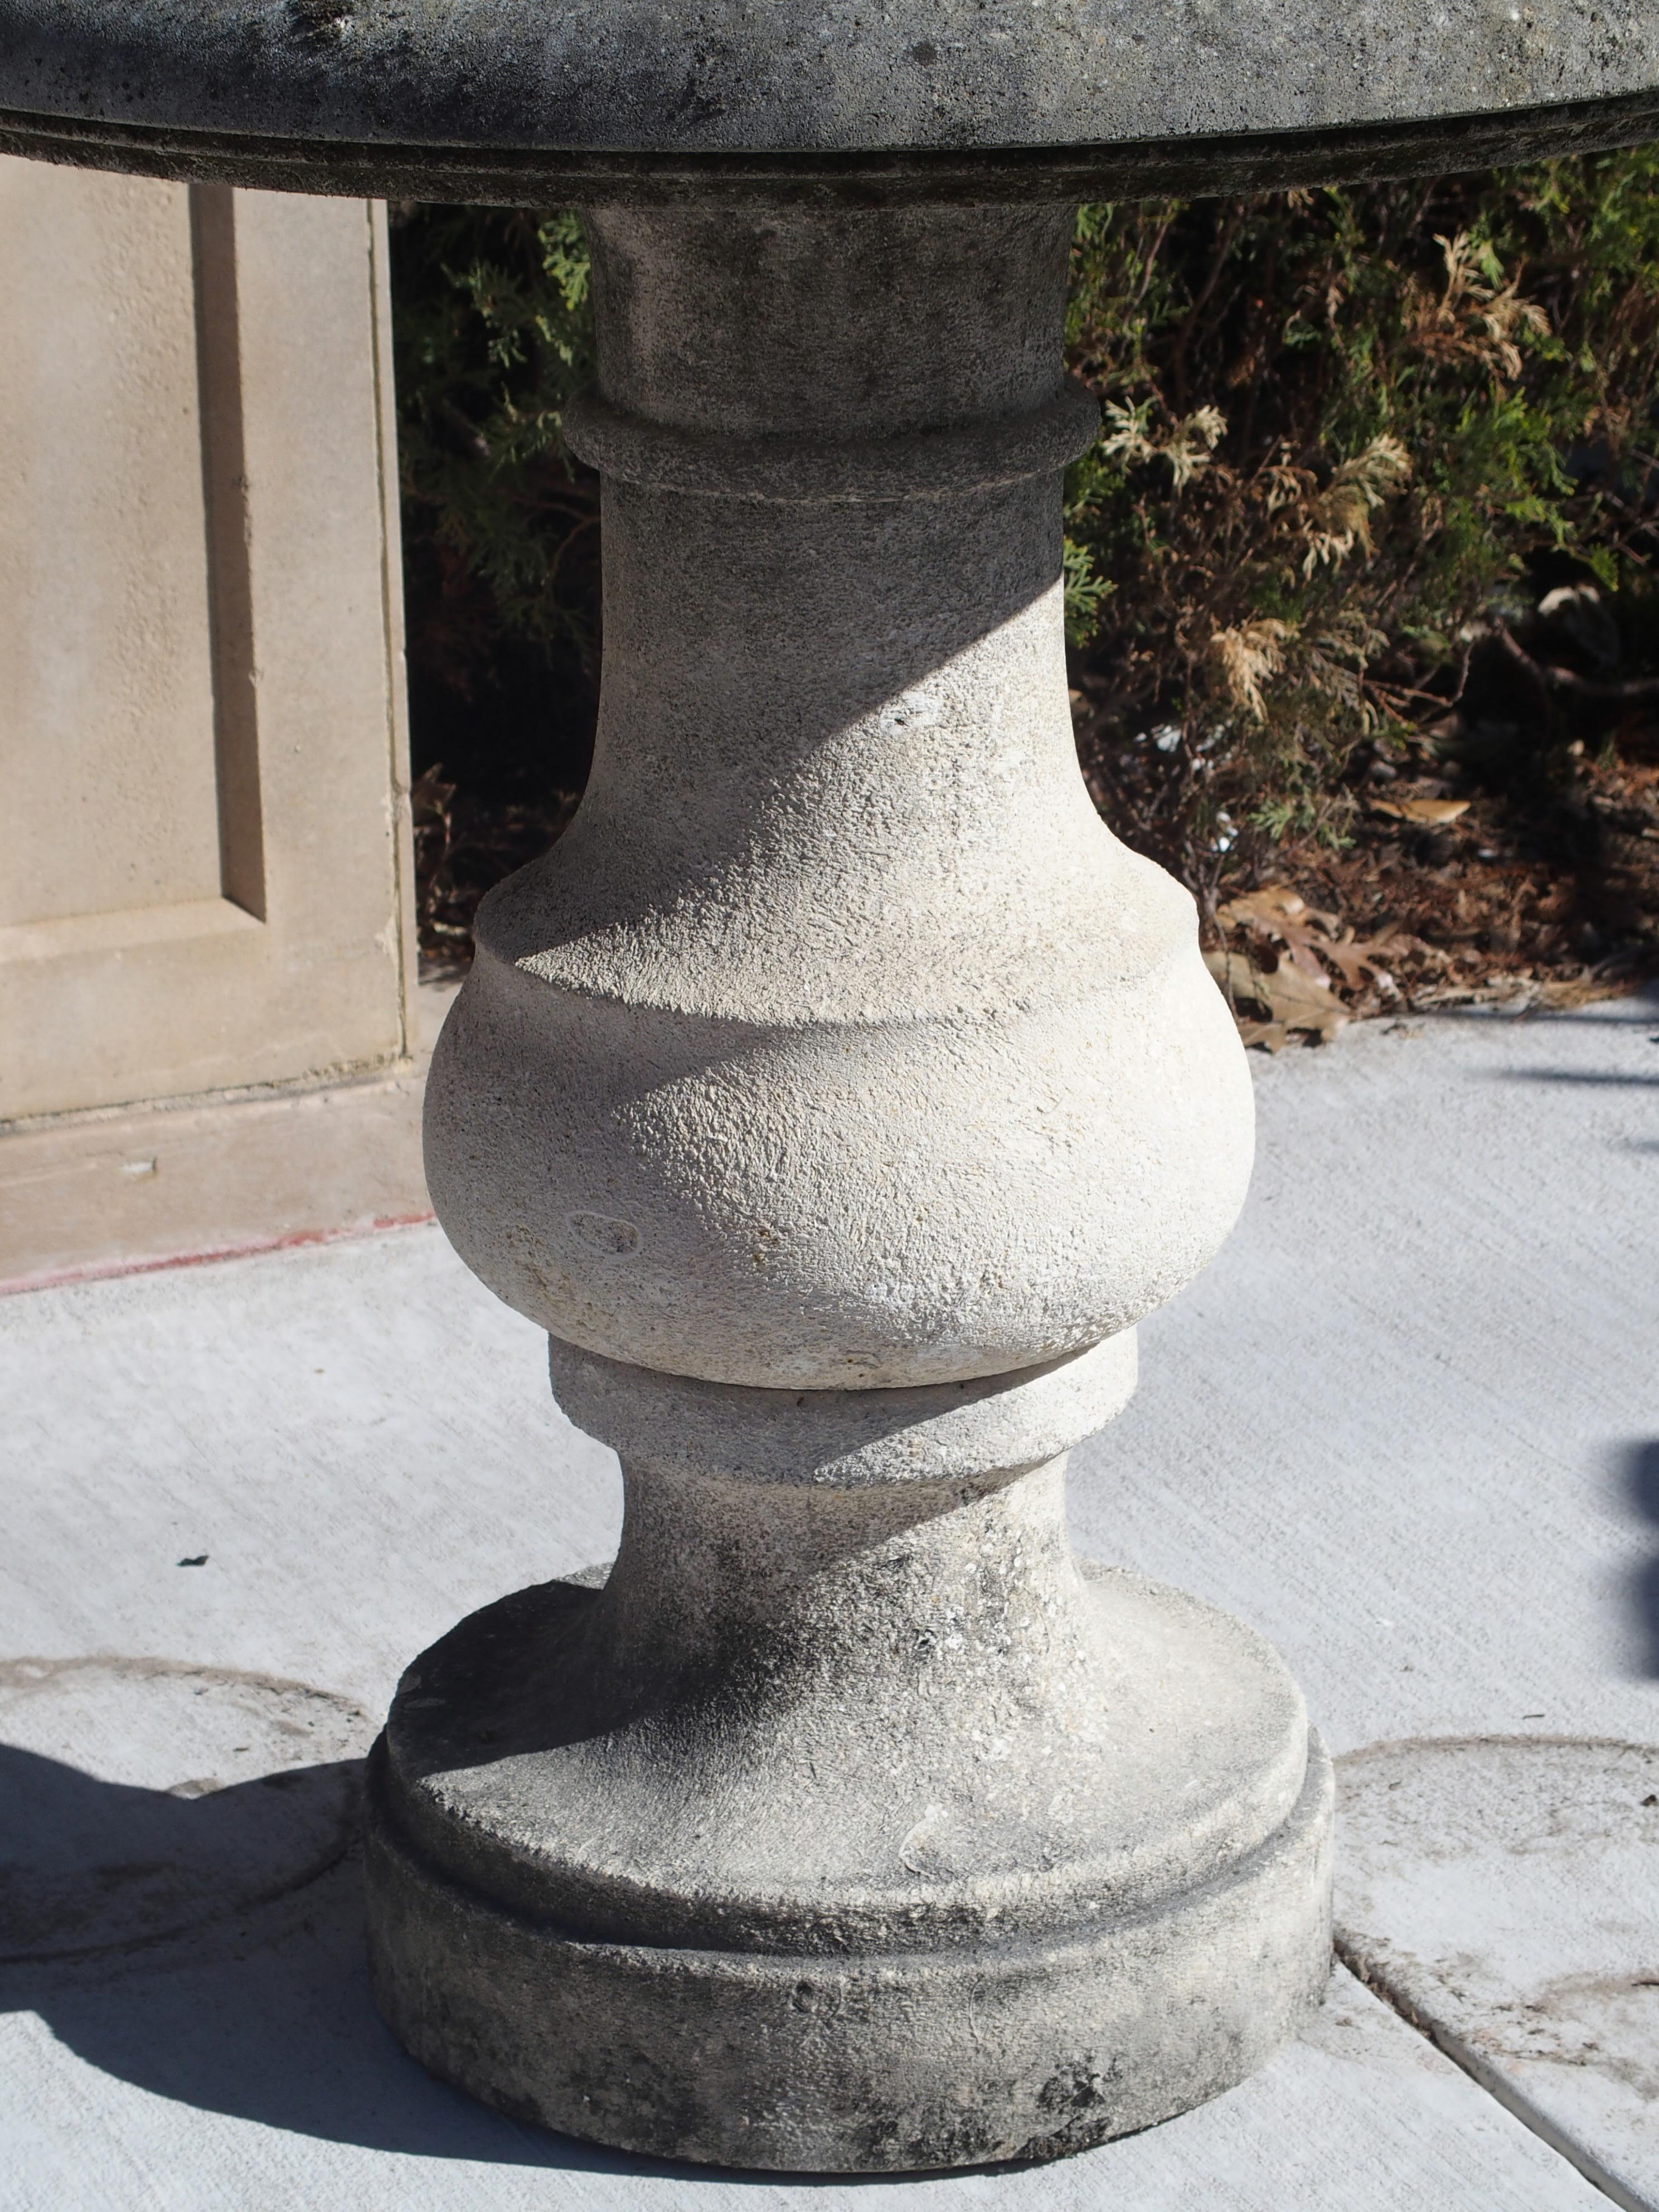 From Italy, this small, round, hand carved table has a single baluster pedestal with round base. The top piece has a nice quarter round molding. Perfect for indoors or outside, this charming stone table can be used as a bistro table, or side table.